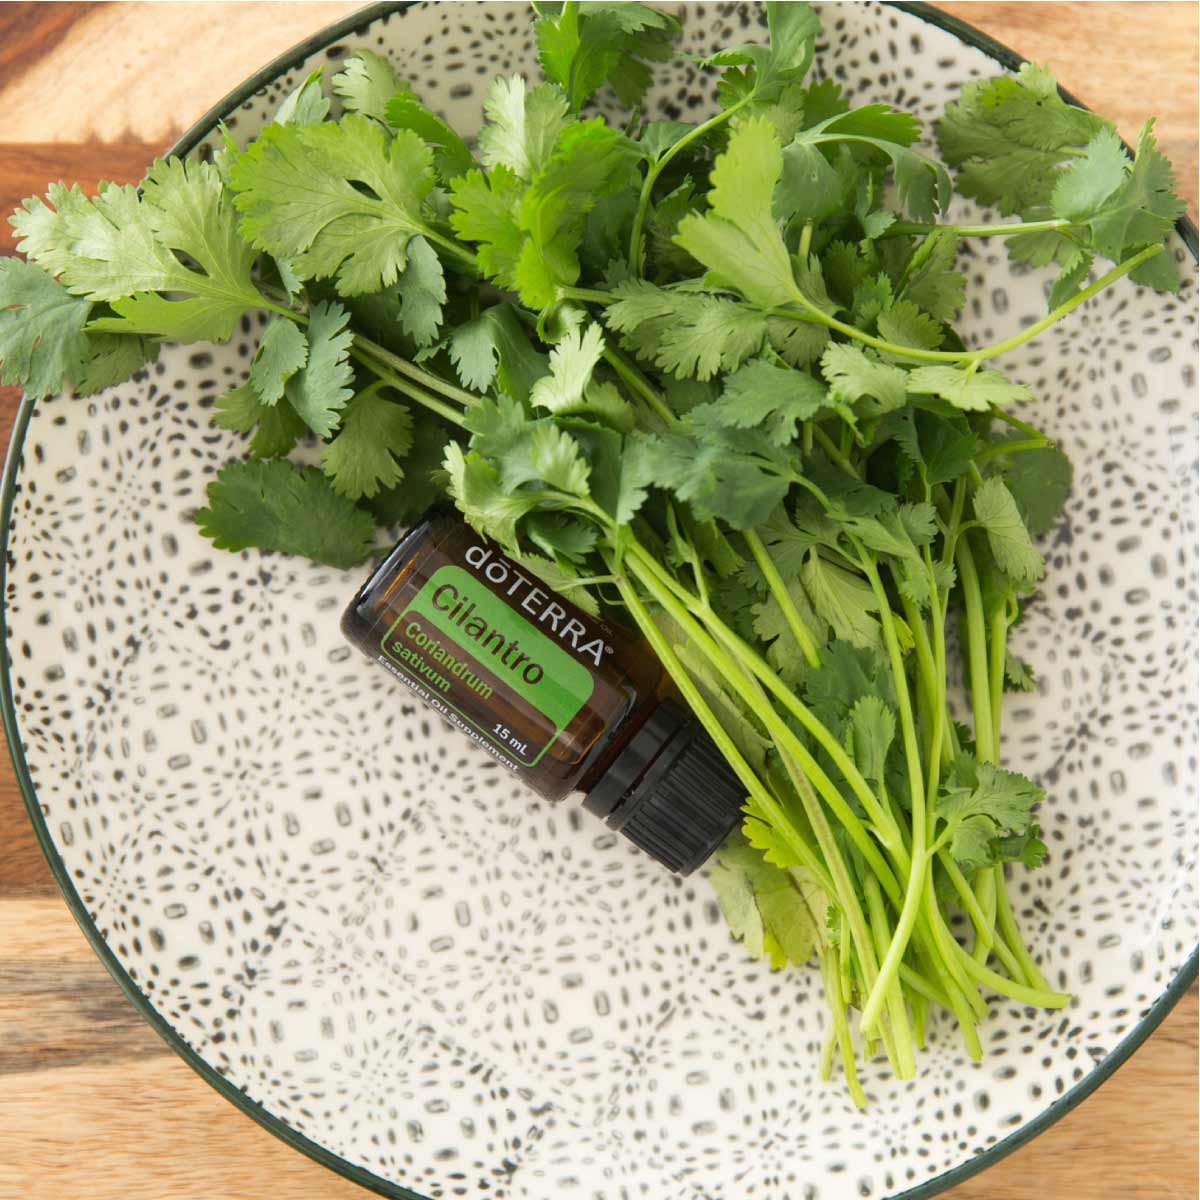 doTERRA Cilantro essential oil bottle and fresh Cilantro leaves. What is Cilantro oil good for? People use Cilantro essential oil for cooking, cleaning, and skin.